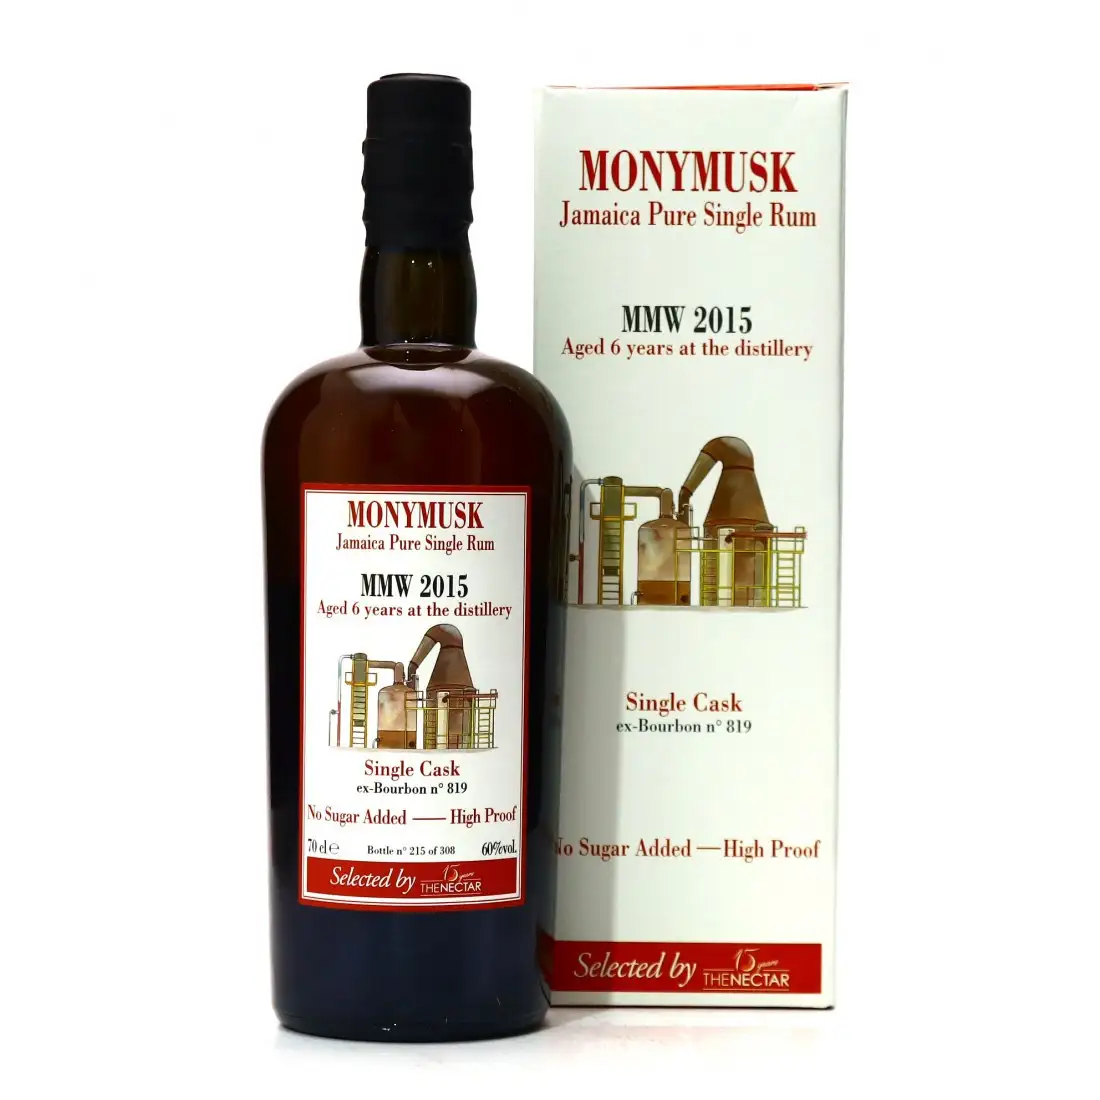 Image of the front of the bottle of the rum The Nectar MMW